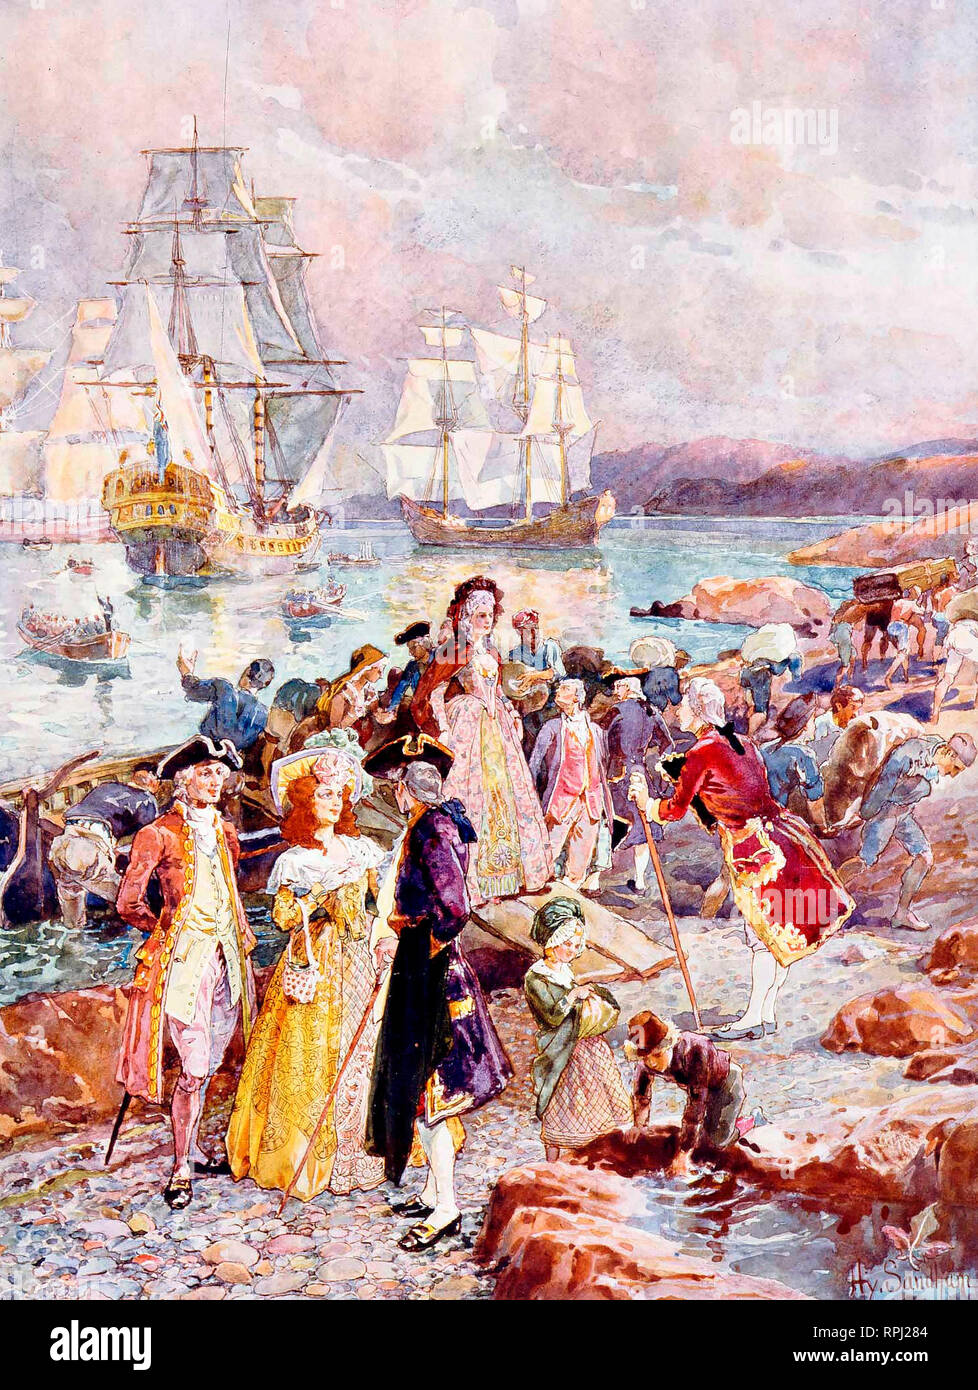 The Coming of the Loyalists - Painting shows romanticised view of United Empire Loyalists arriving in New Brunswick, circa 1783 - Henry Sandham Stock Photo